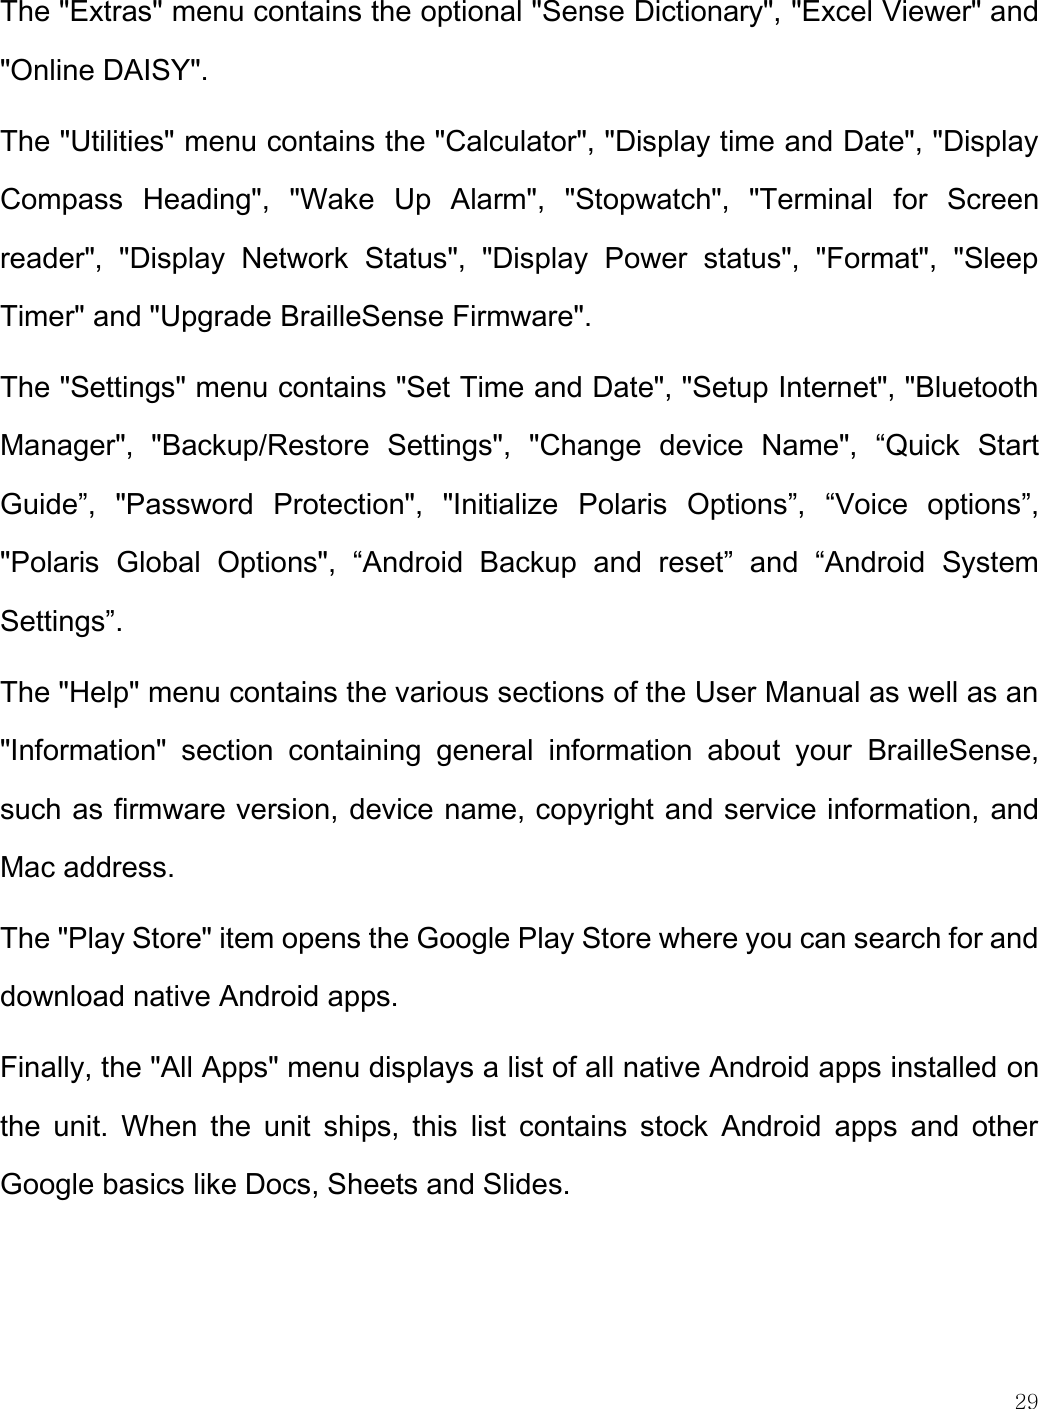    29  The &quot;Extras&quot; menu contains the optional &quot;Sense Dictionary&quot;, &quot;Excel Viewer&quot; and &quot;Online DAISY&quot;.  The &quot;Utilities&quot; menu contains the &quot;Calculator&quot;, &quot;Display time and Date&quot;, &quot;Display Compass  Heading&quot;,  &quot;Wake  Up  Alarm&quot;,  &quot;Stopwatch&quot;,  &quot;Terminal  for  Screen reader&quot;,  &quot;Display  Network  Status&quot;,  &quot;Display  Power  status&quot;,  &quot;Format&quot;,  &quot;Sleep Timer&quot; and &quot;Upgrade BrailleSense Firmware&quot;. The &quot;Settings&quot; menu contains &quot;Set Time and Date&quot;, &quot;Setup Internet&quot;, &quot;Bluetooth Manager&quot;,  &quot;Backup/Restore  Settings&quot;,  &quot;Change  device  Name&quot;,  “Quick  Start Guide”,  &quot;Password  Protection&quot;,  &quot;Initialize  Polaris  Options”,  “Voice  options”, &quot;Polaris  Global  Options&quot;,  “Android  Backup  and  reset”  and  “Android  System Settings”. The &quot;Help&quot; menu contains the various sections of the User Manual as well as an &quot;Information&quot;  section  containing  general  information  about  your  BrailleSense, such as firmware version, device name, copyright and service information, and Mac address. The &quot;Play Store&quot; item opens the Google Play Store where you can search for and download native Android apps. Finally, the &quot;All Apps&quot; menu displays a list of all native Android apps installed on the  unit.  When  the  unit  ships,  this  list  contains  stock  Android  apps  and  other Google basics like Docs, Sheets and Slides. 